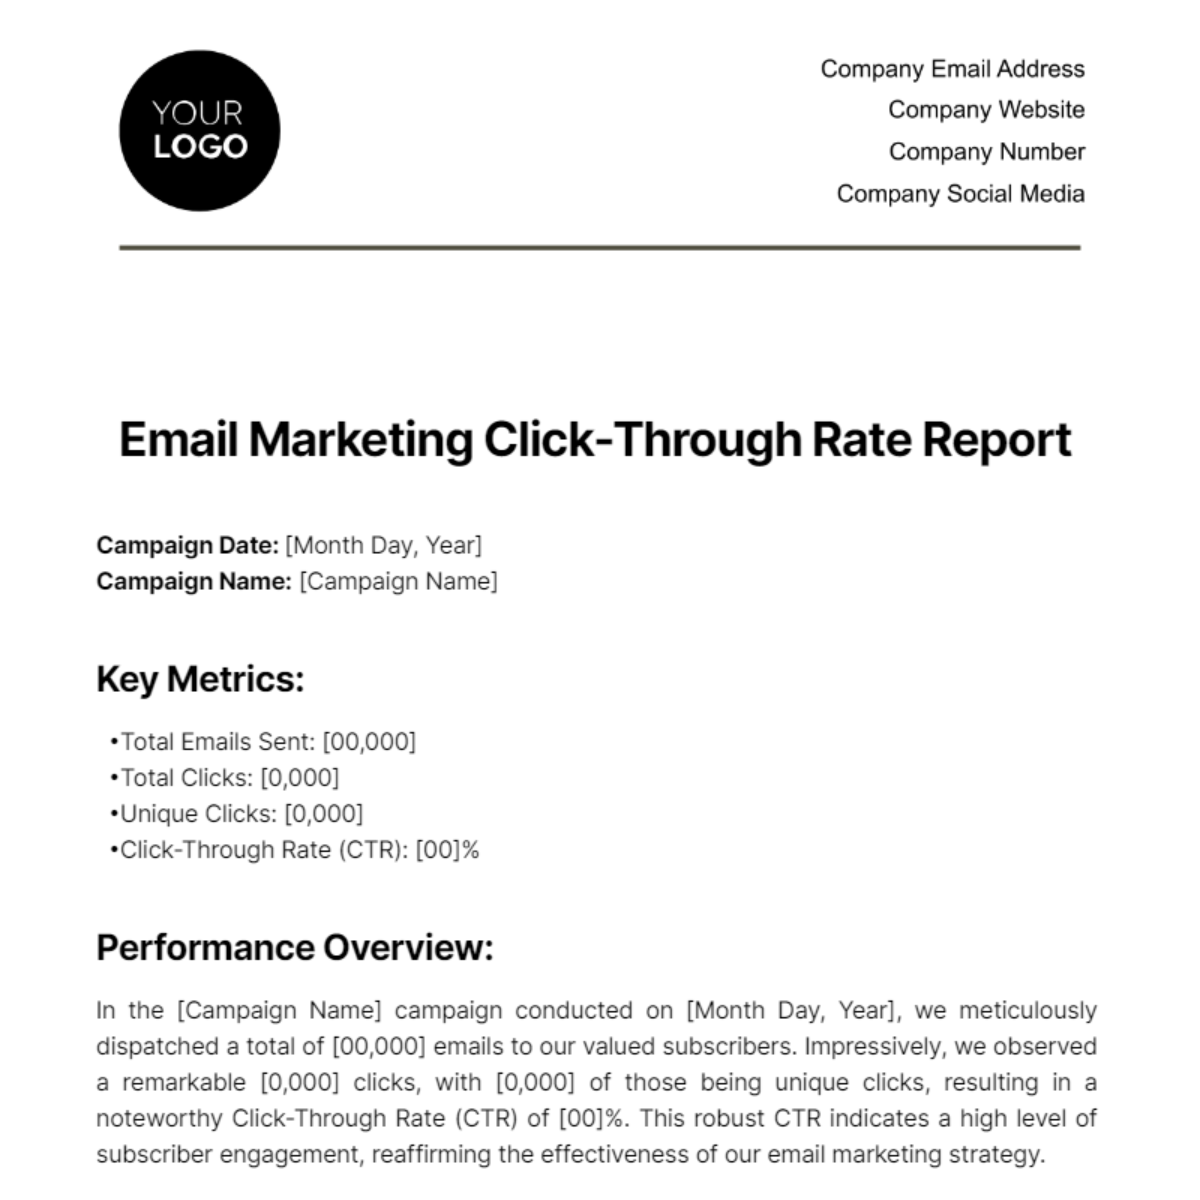 Free Email Marketing Click-Through Rate Report Template